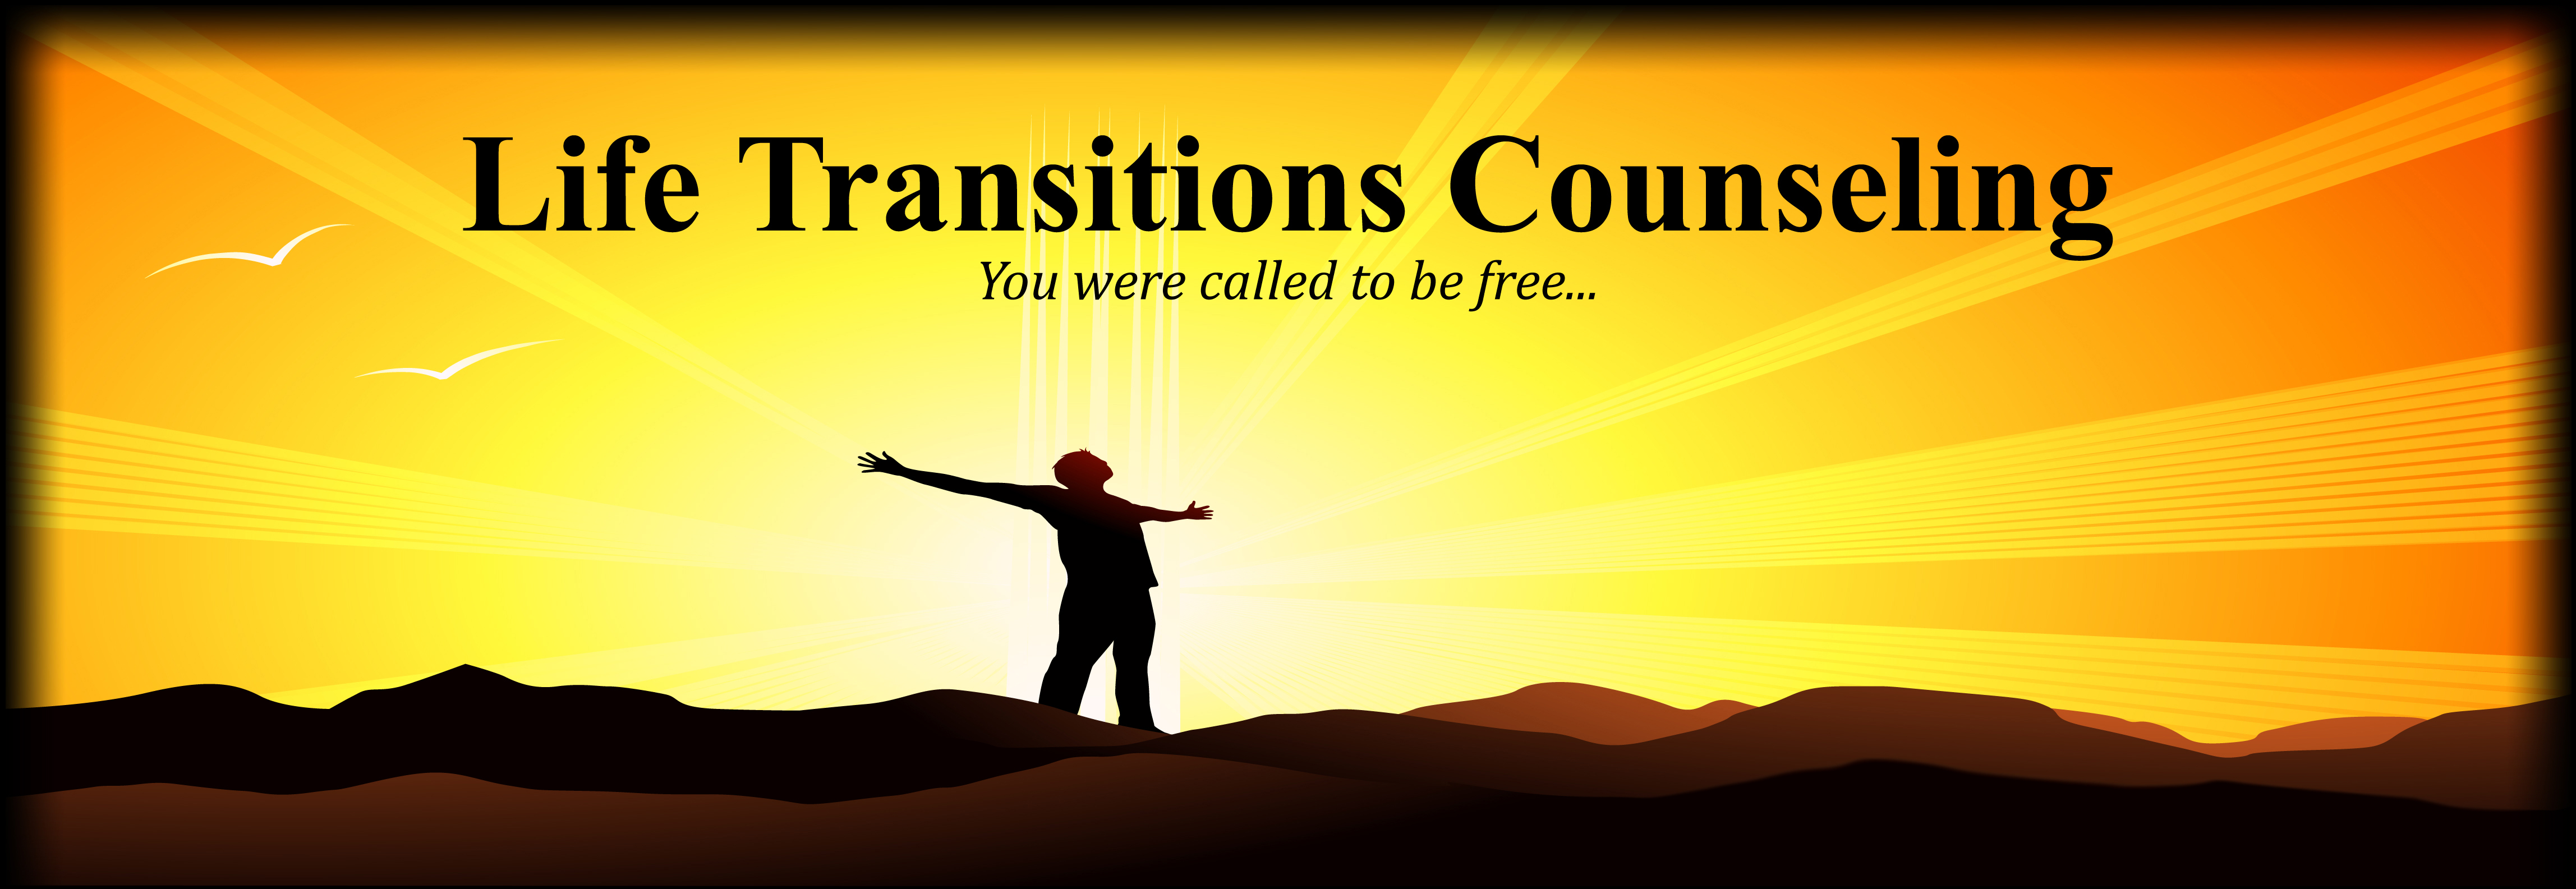 Life Transitions Counseling